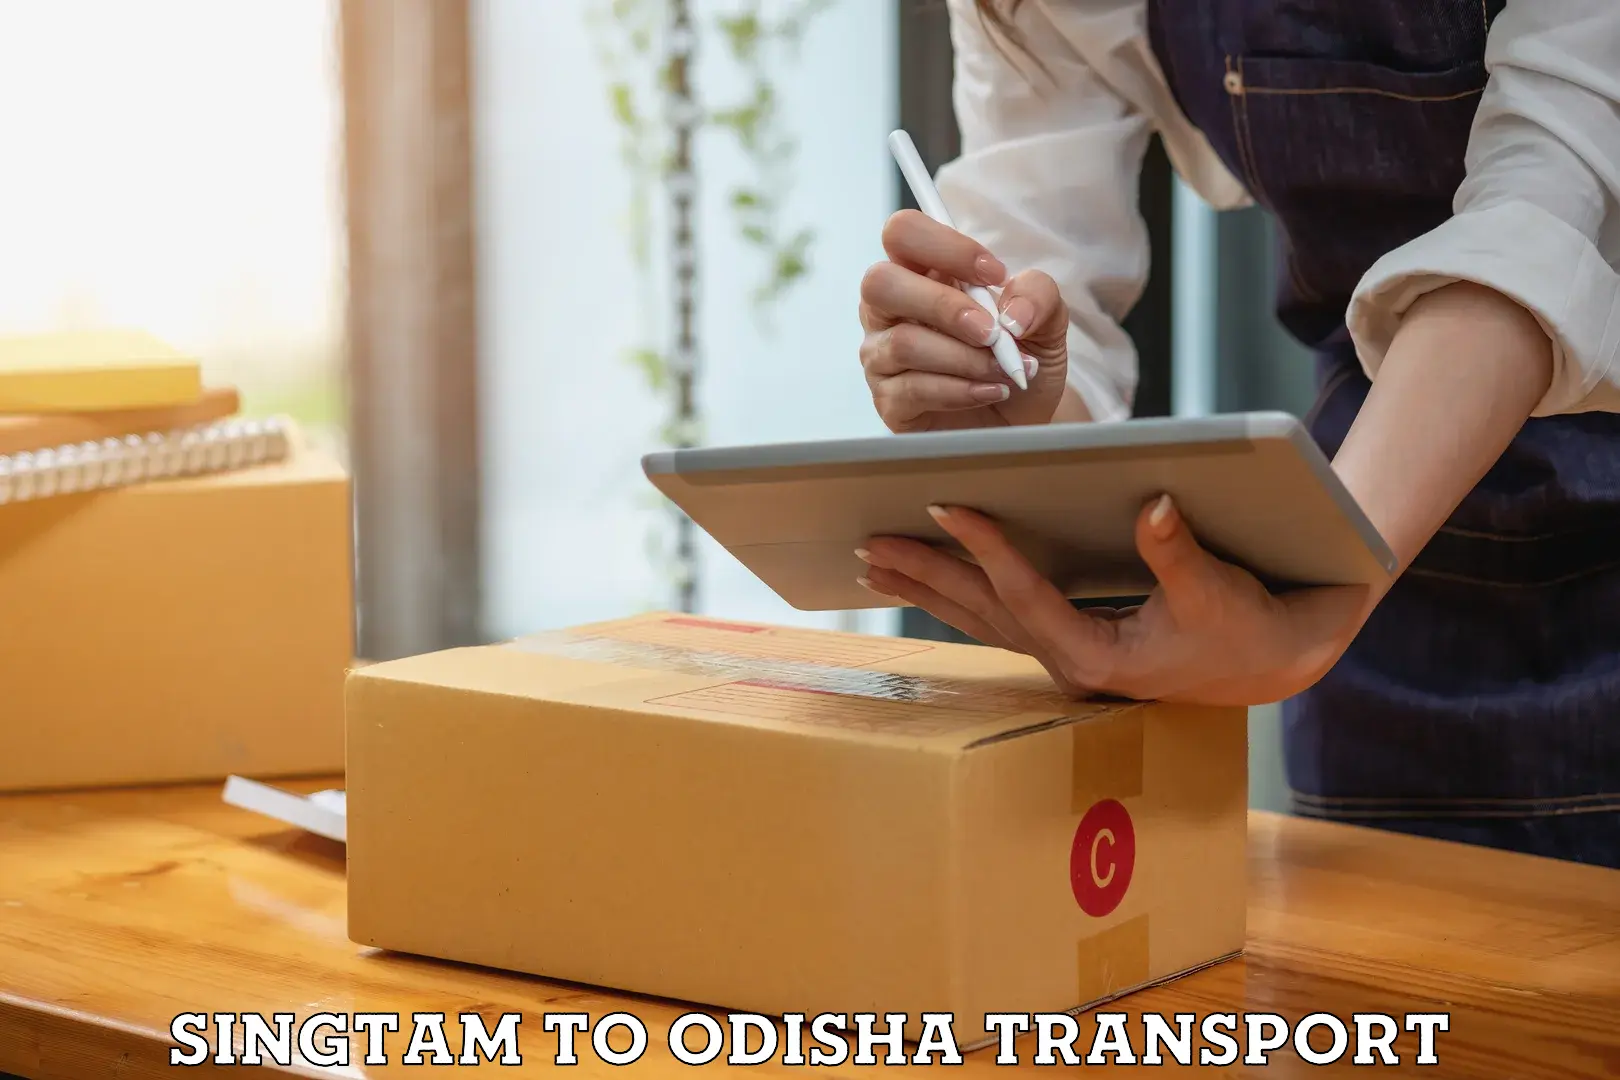 Transport bike from one state to another Singtam to Odisha